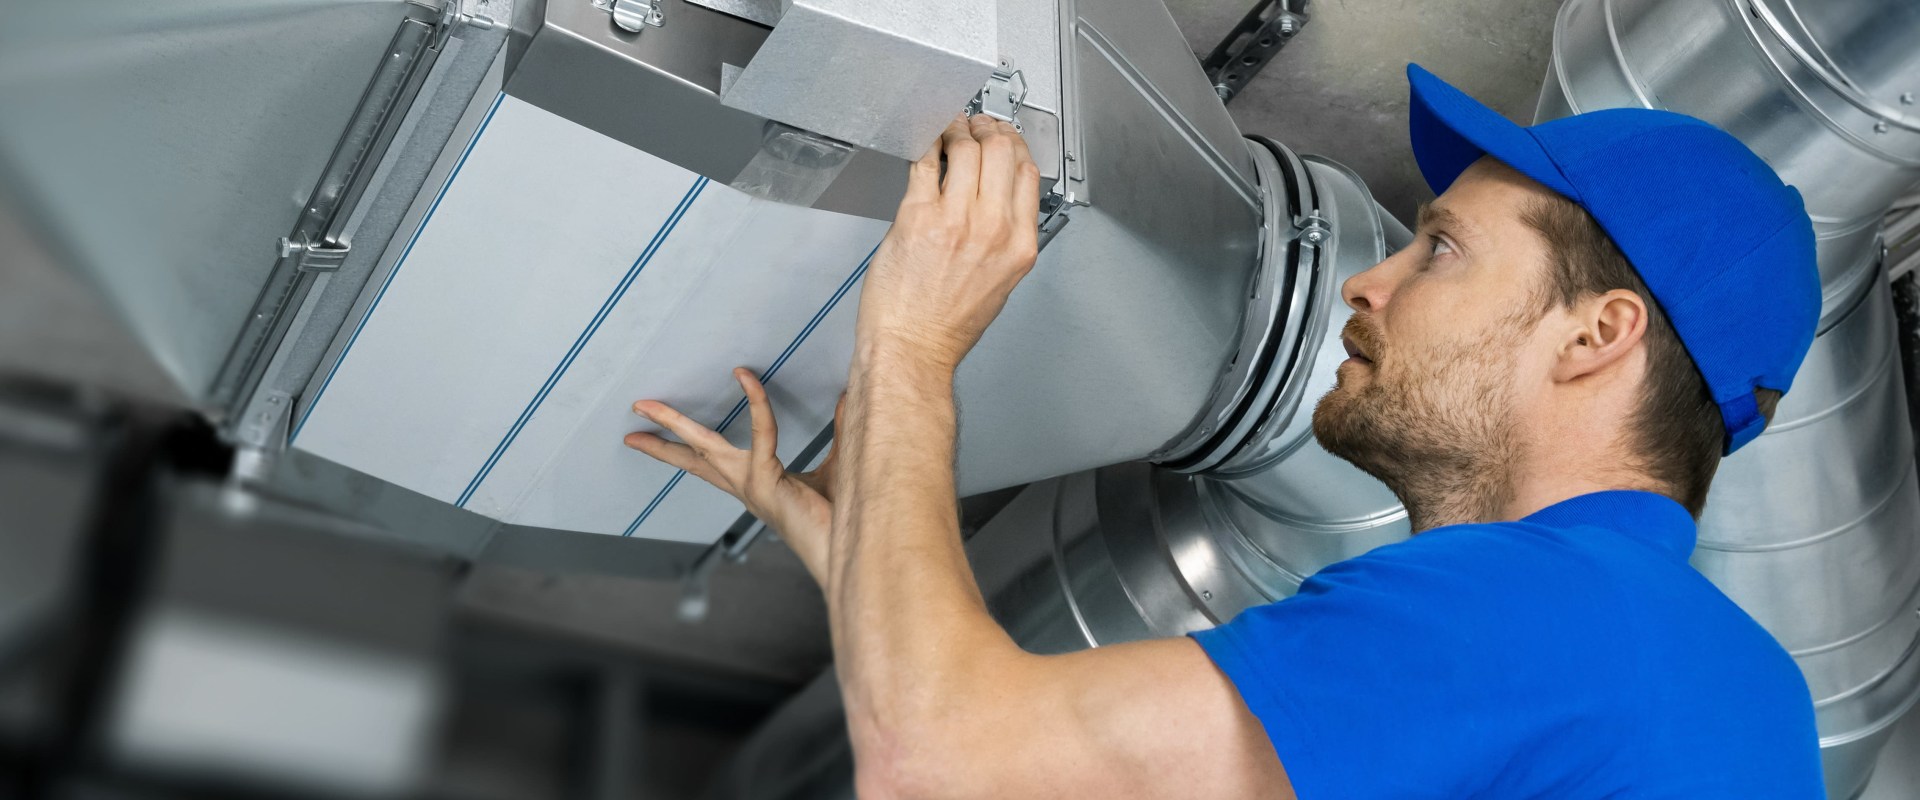 Air Ionizer Installation in Coral Springs FL: What Maintenance is Needed?